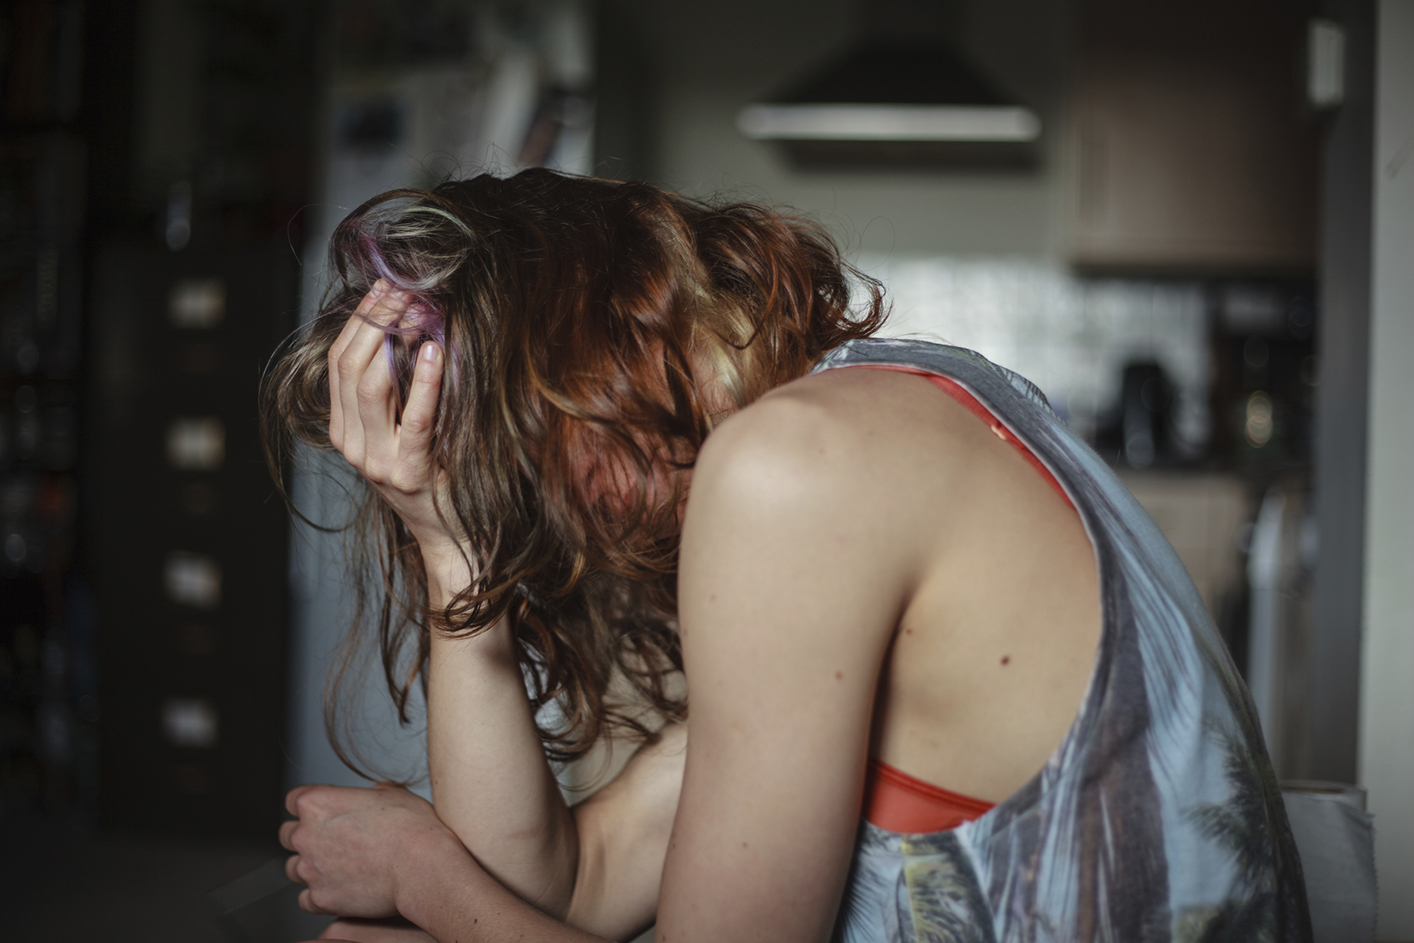 A sad young woman is sitting in her kitchen with a headache